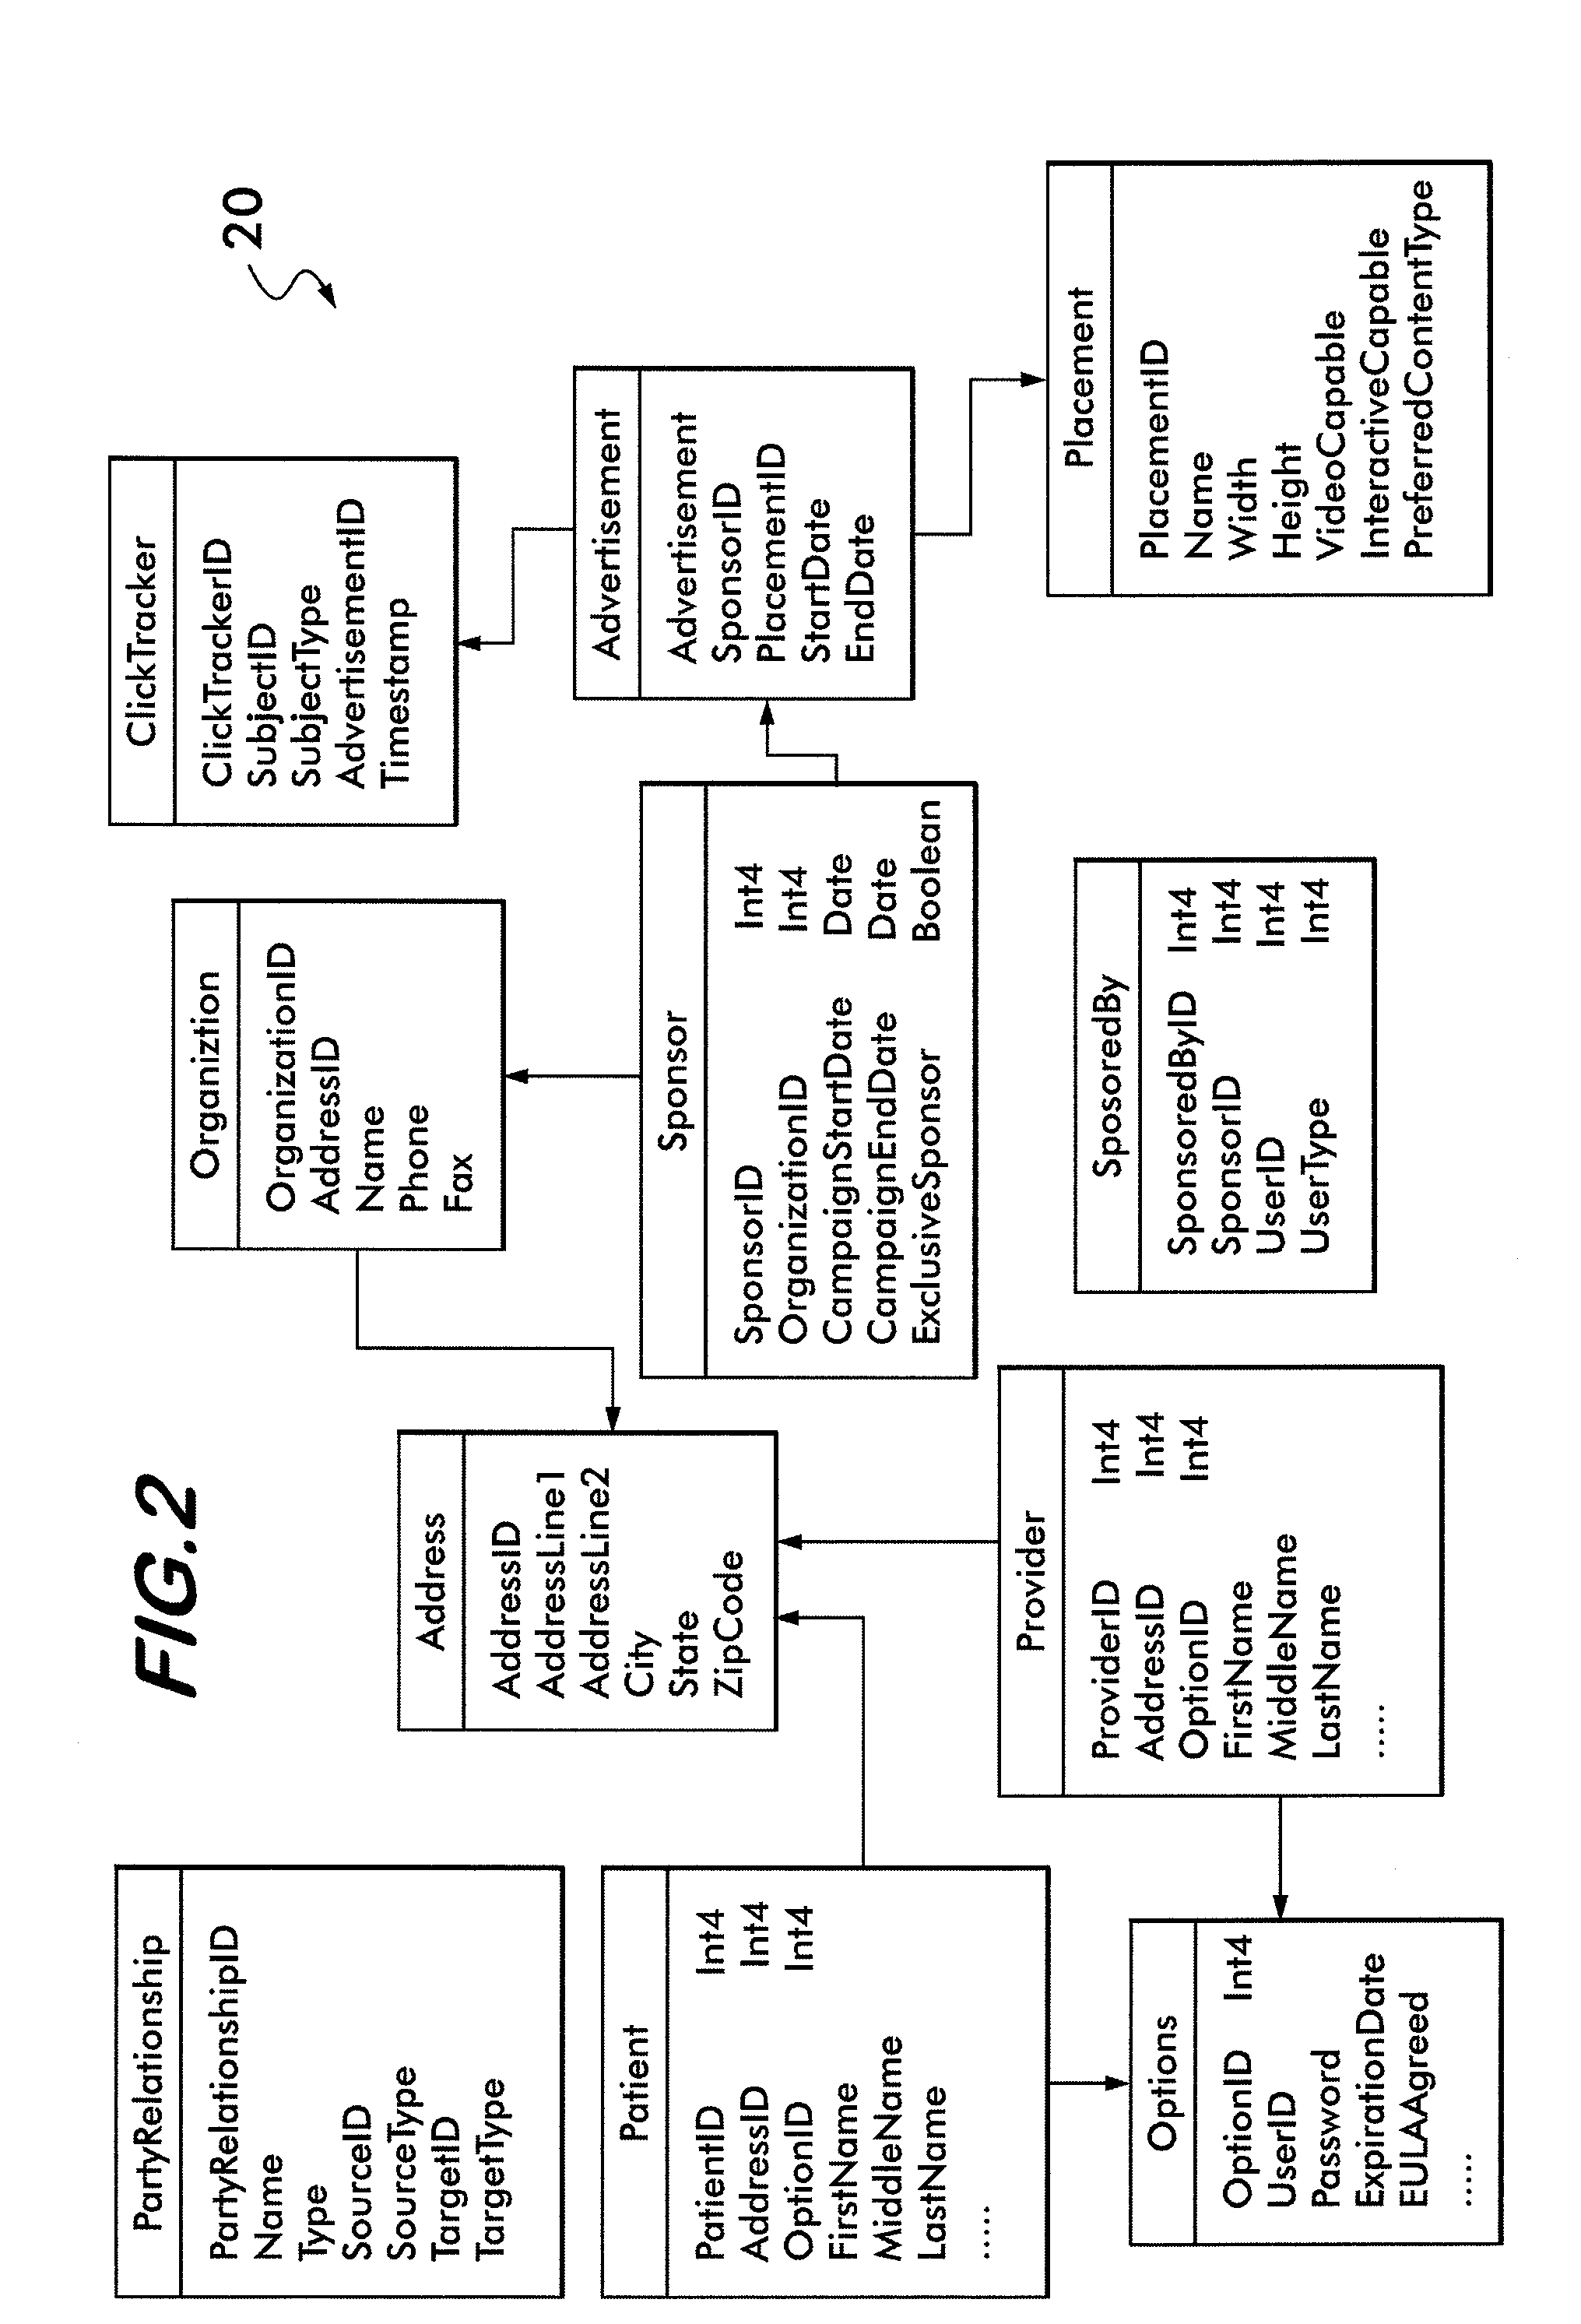 System and method for advertising and deliverig media in conjunction with an electronic medical records management, imaging and sharing system